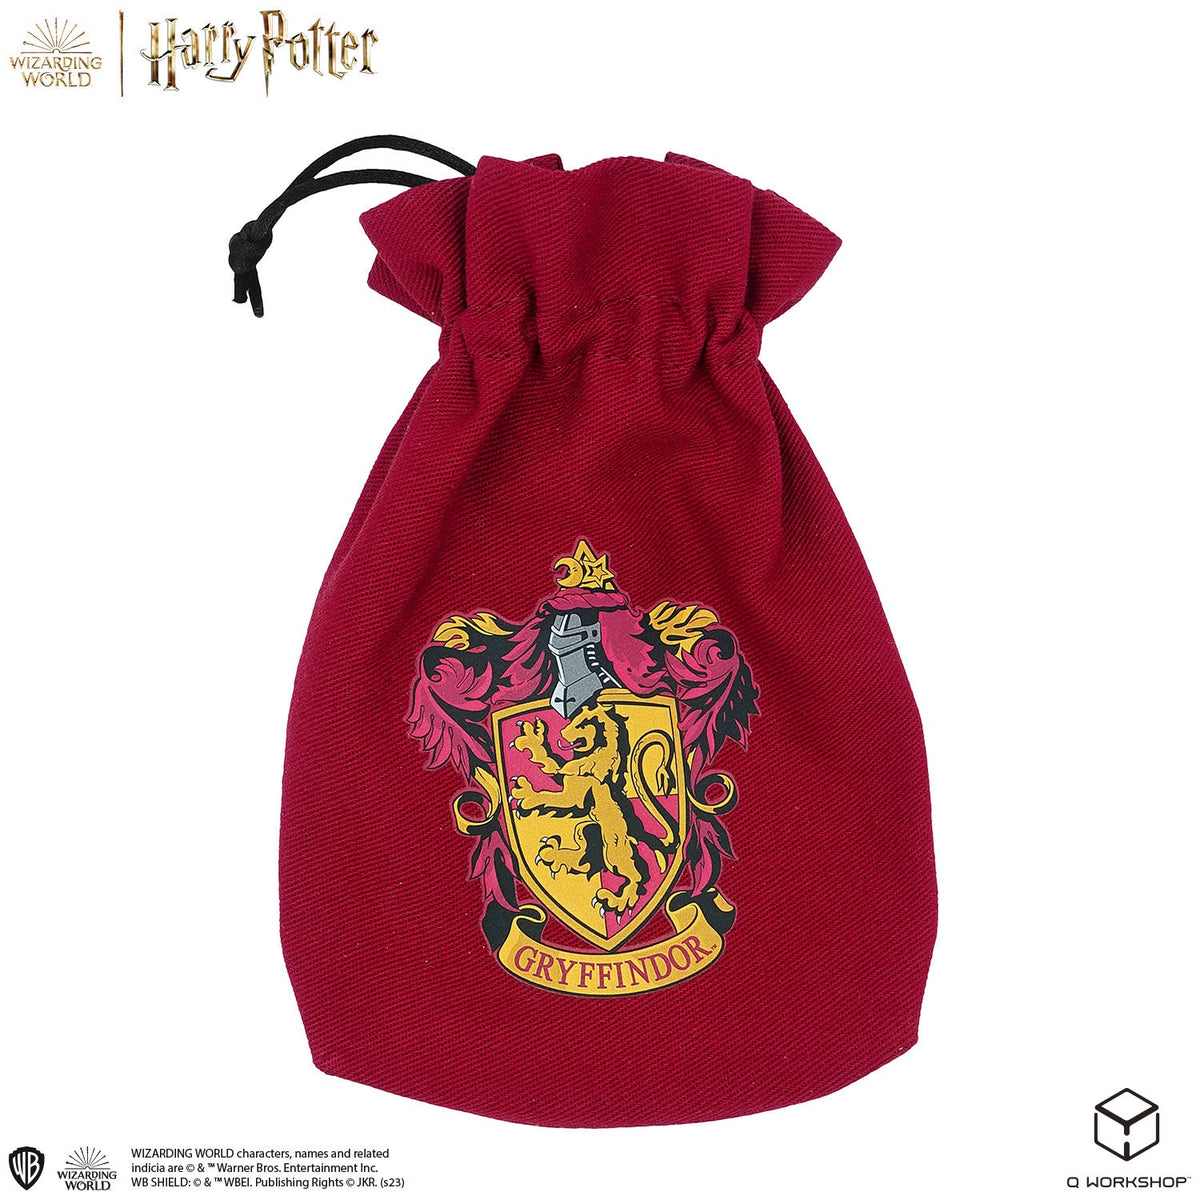 Q Workshop - Harry Potter Gryffindor Dice and Pouch